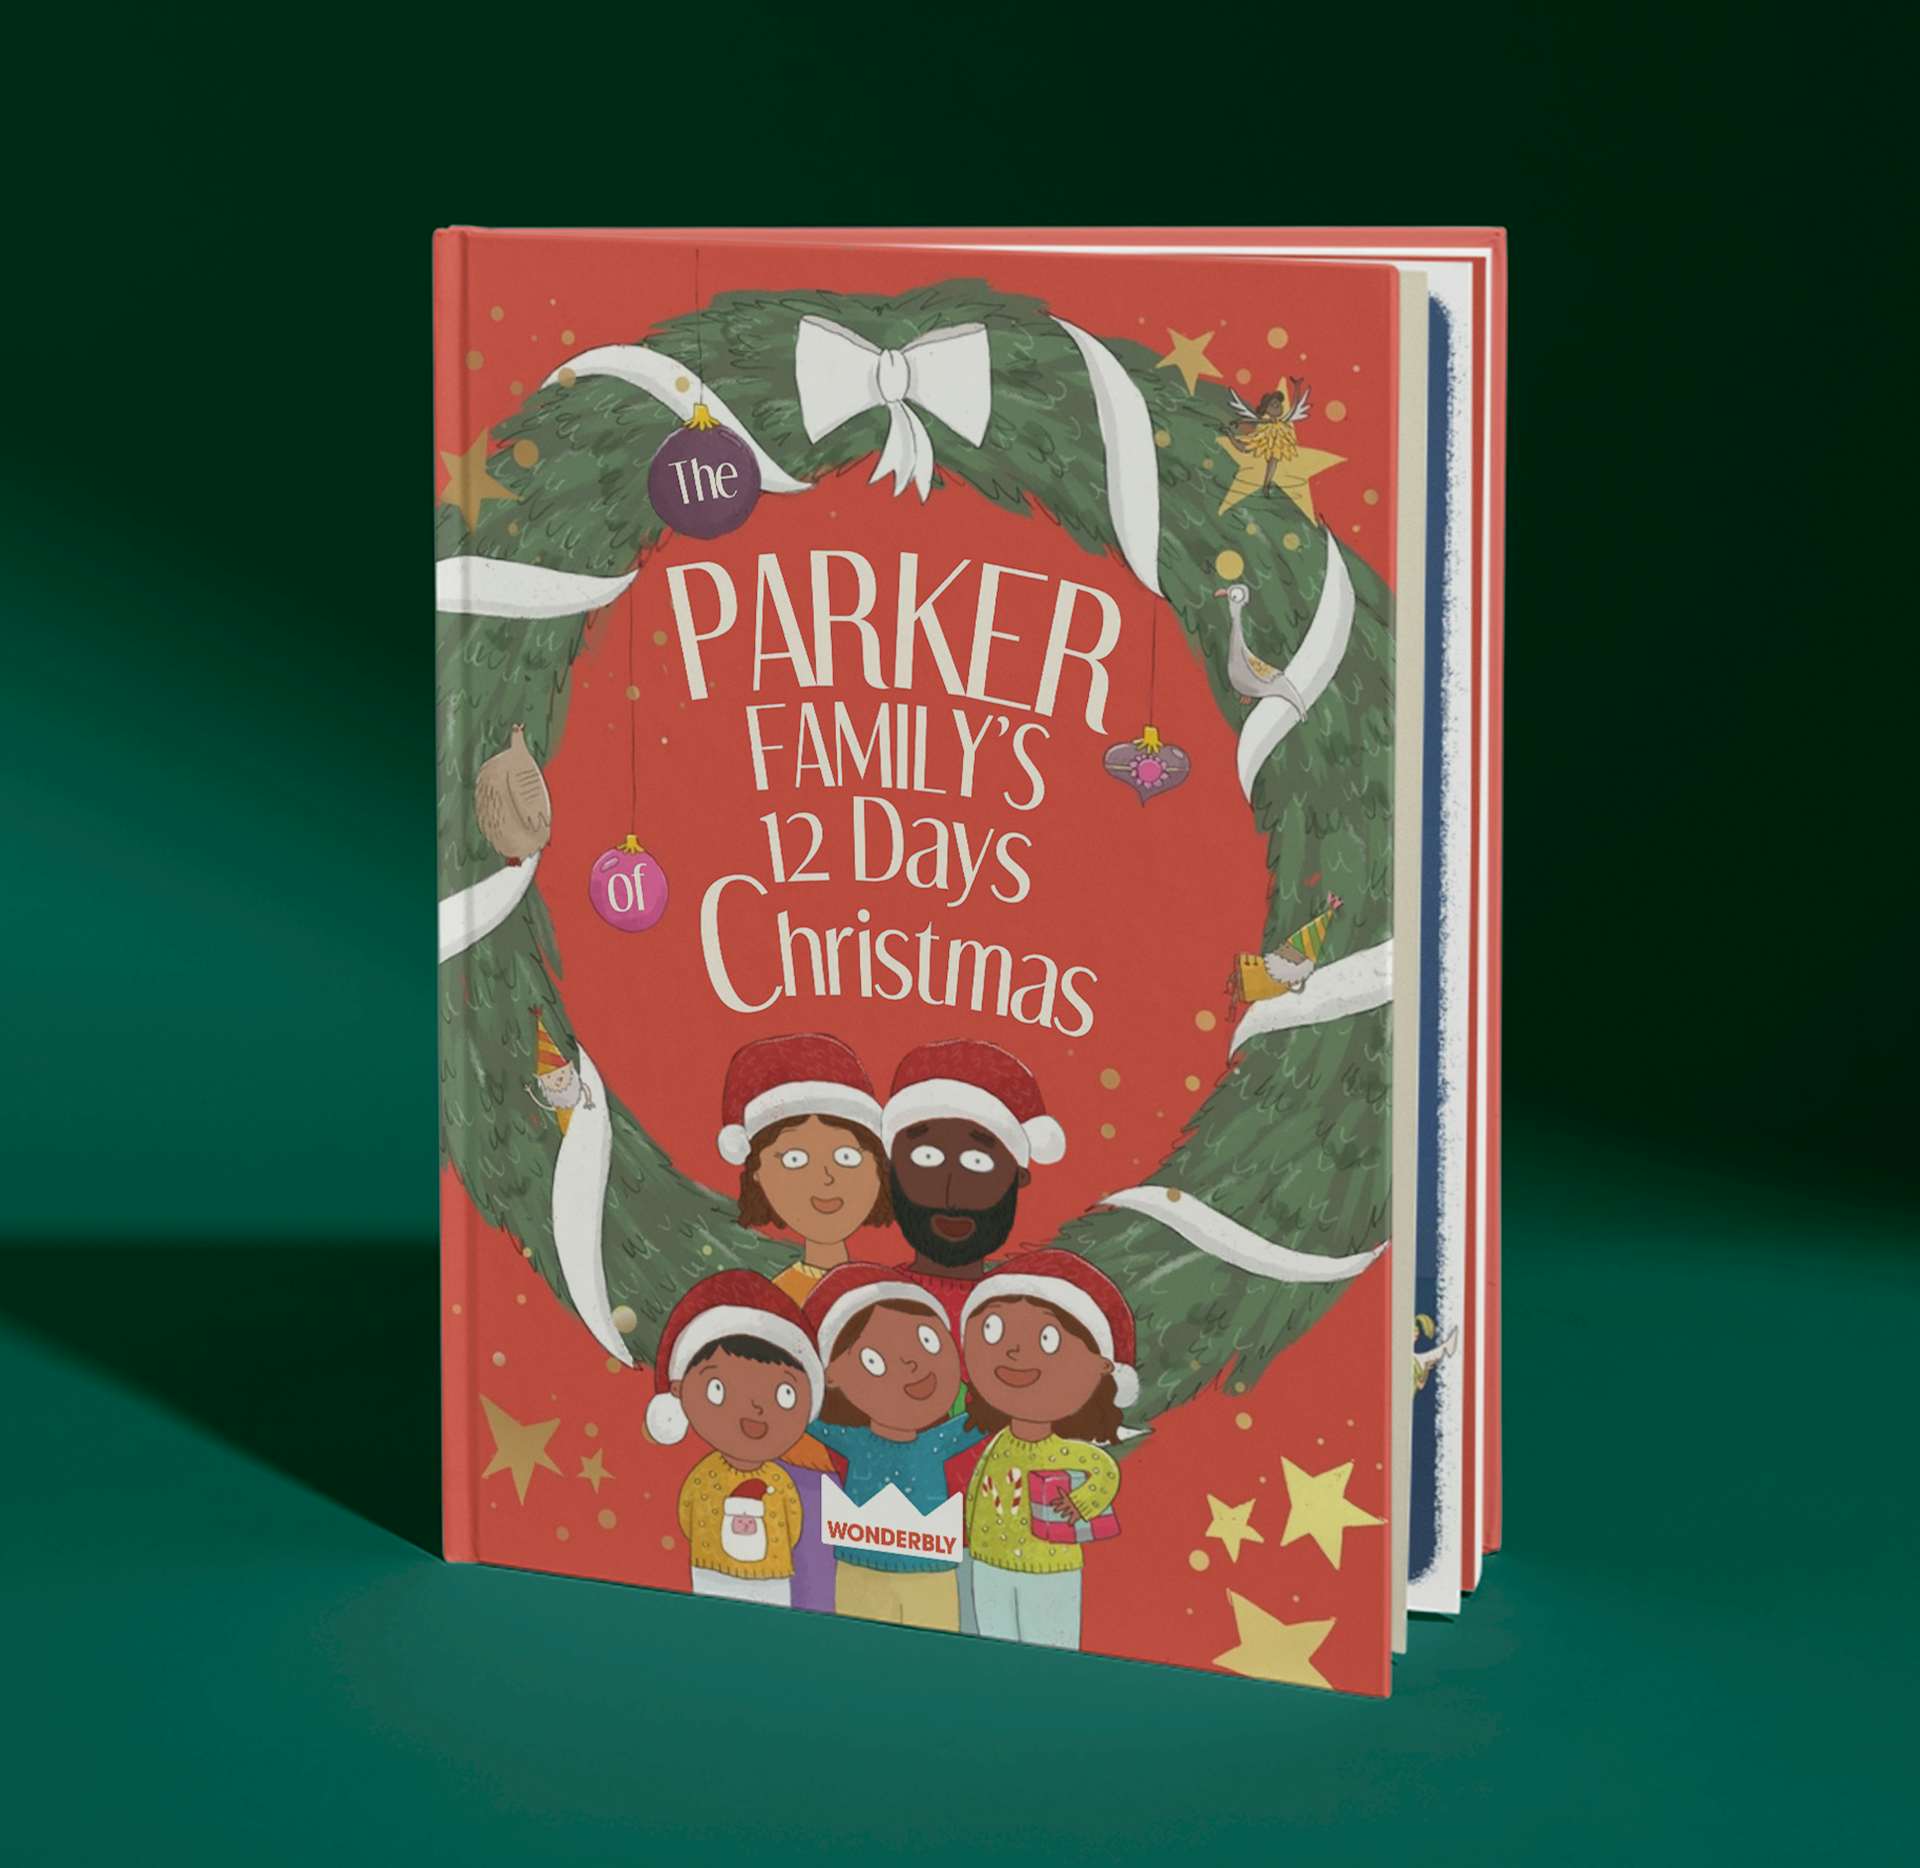 My 12 Days of Christmas Personalized Books, Kids Books